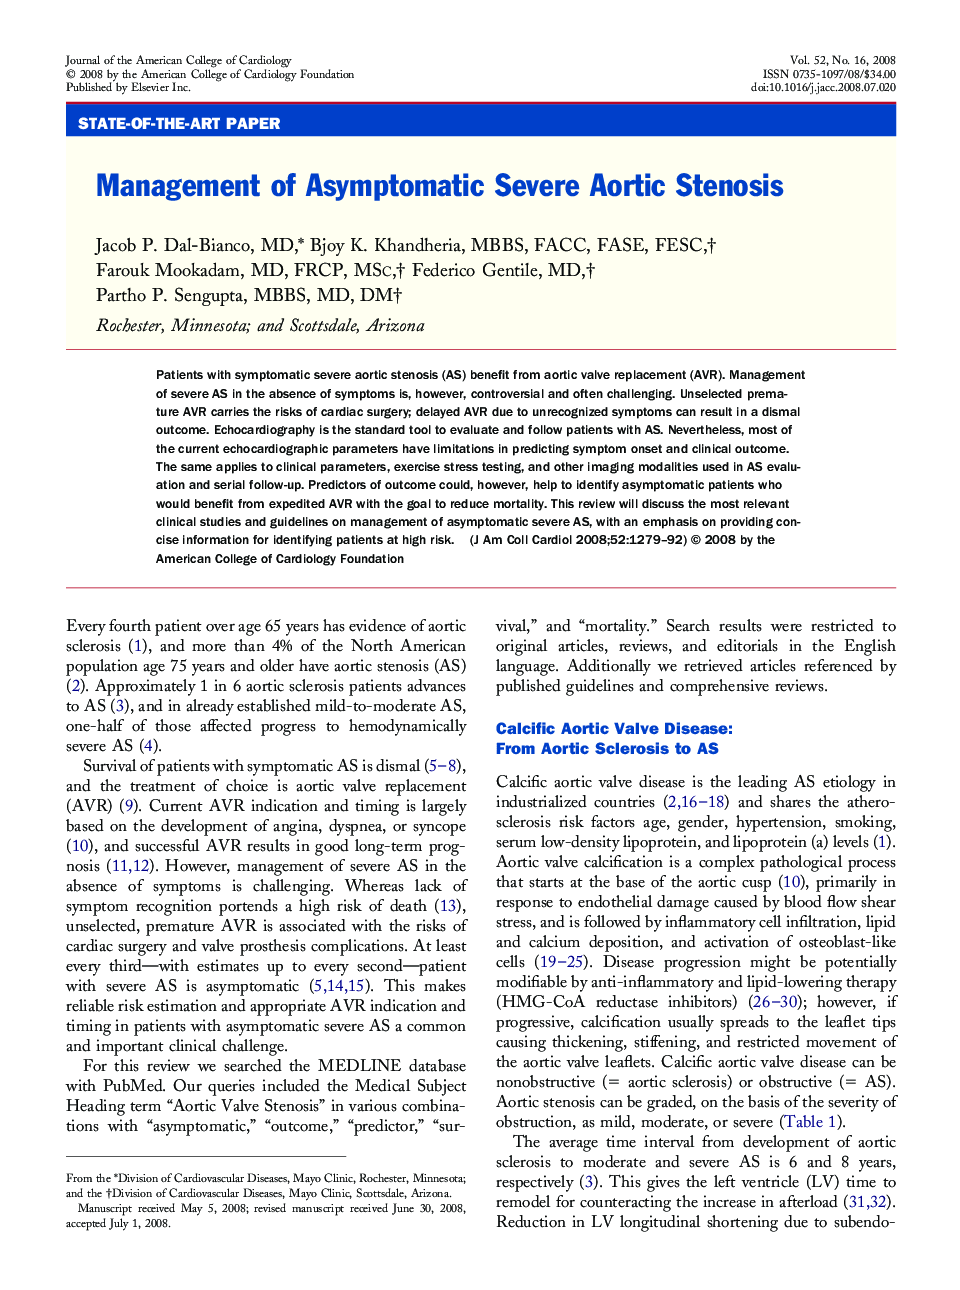 Management of Asymptomatic Severe Aortic Stenosis